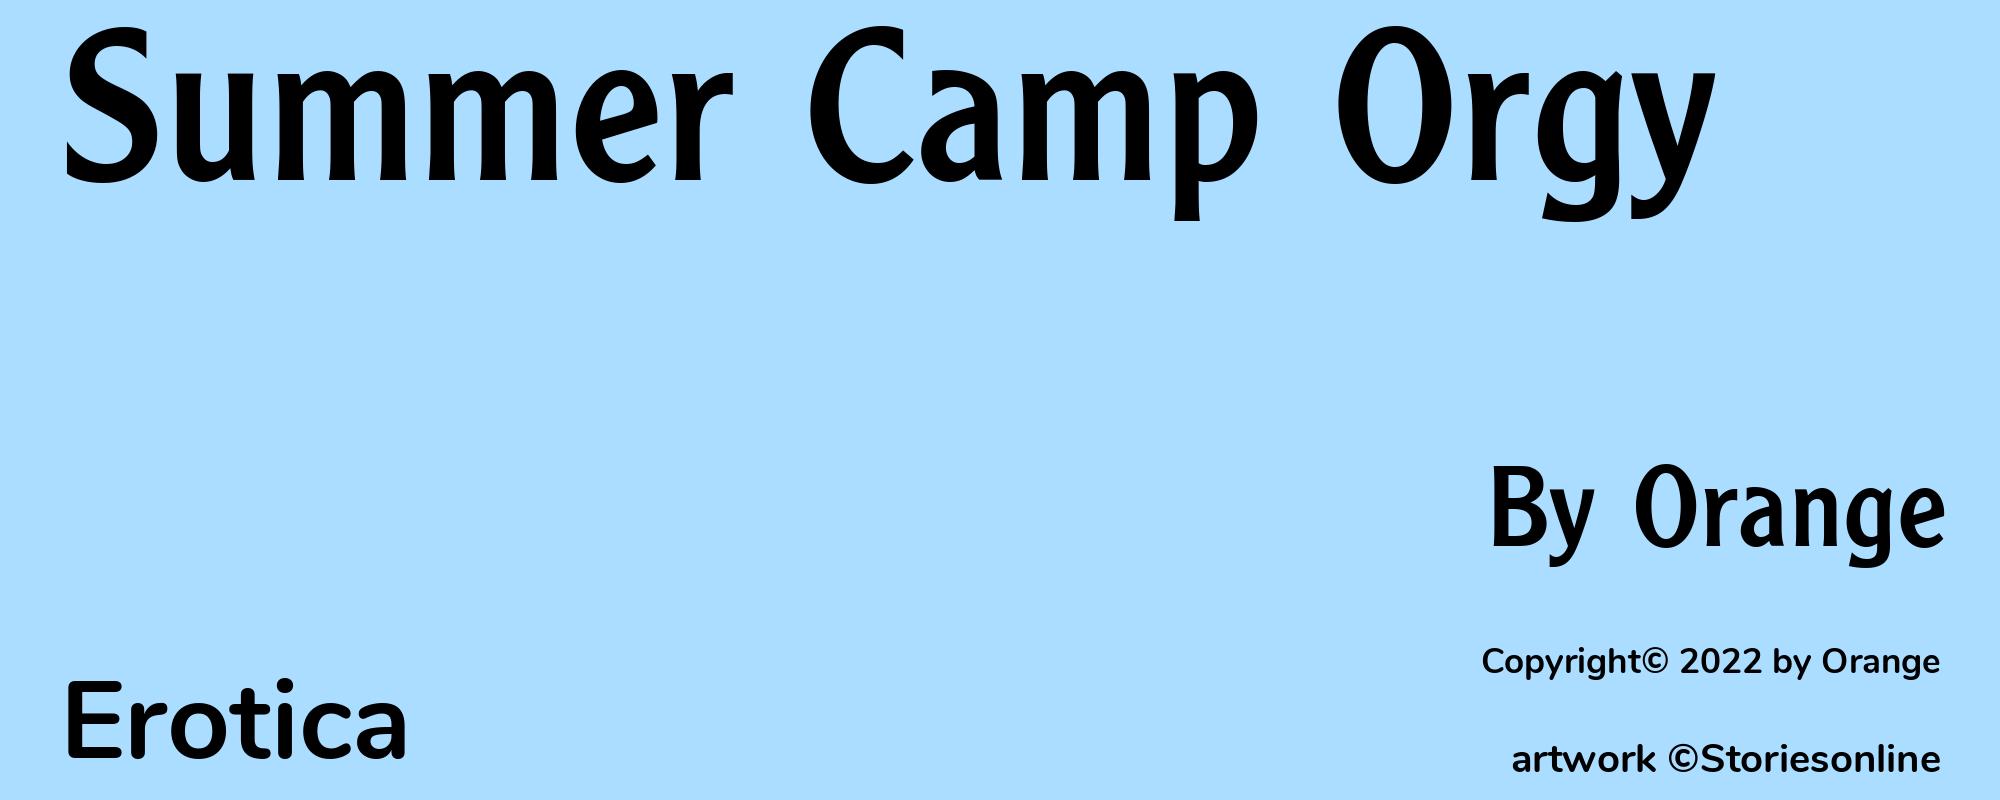 Summer Camp Orgy - Cover